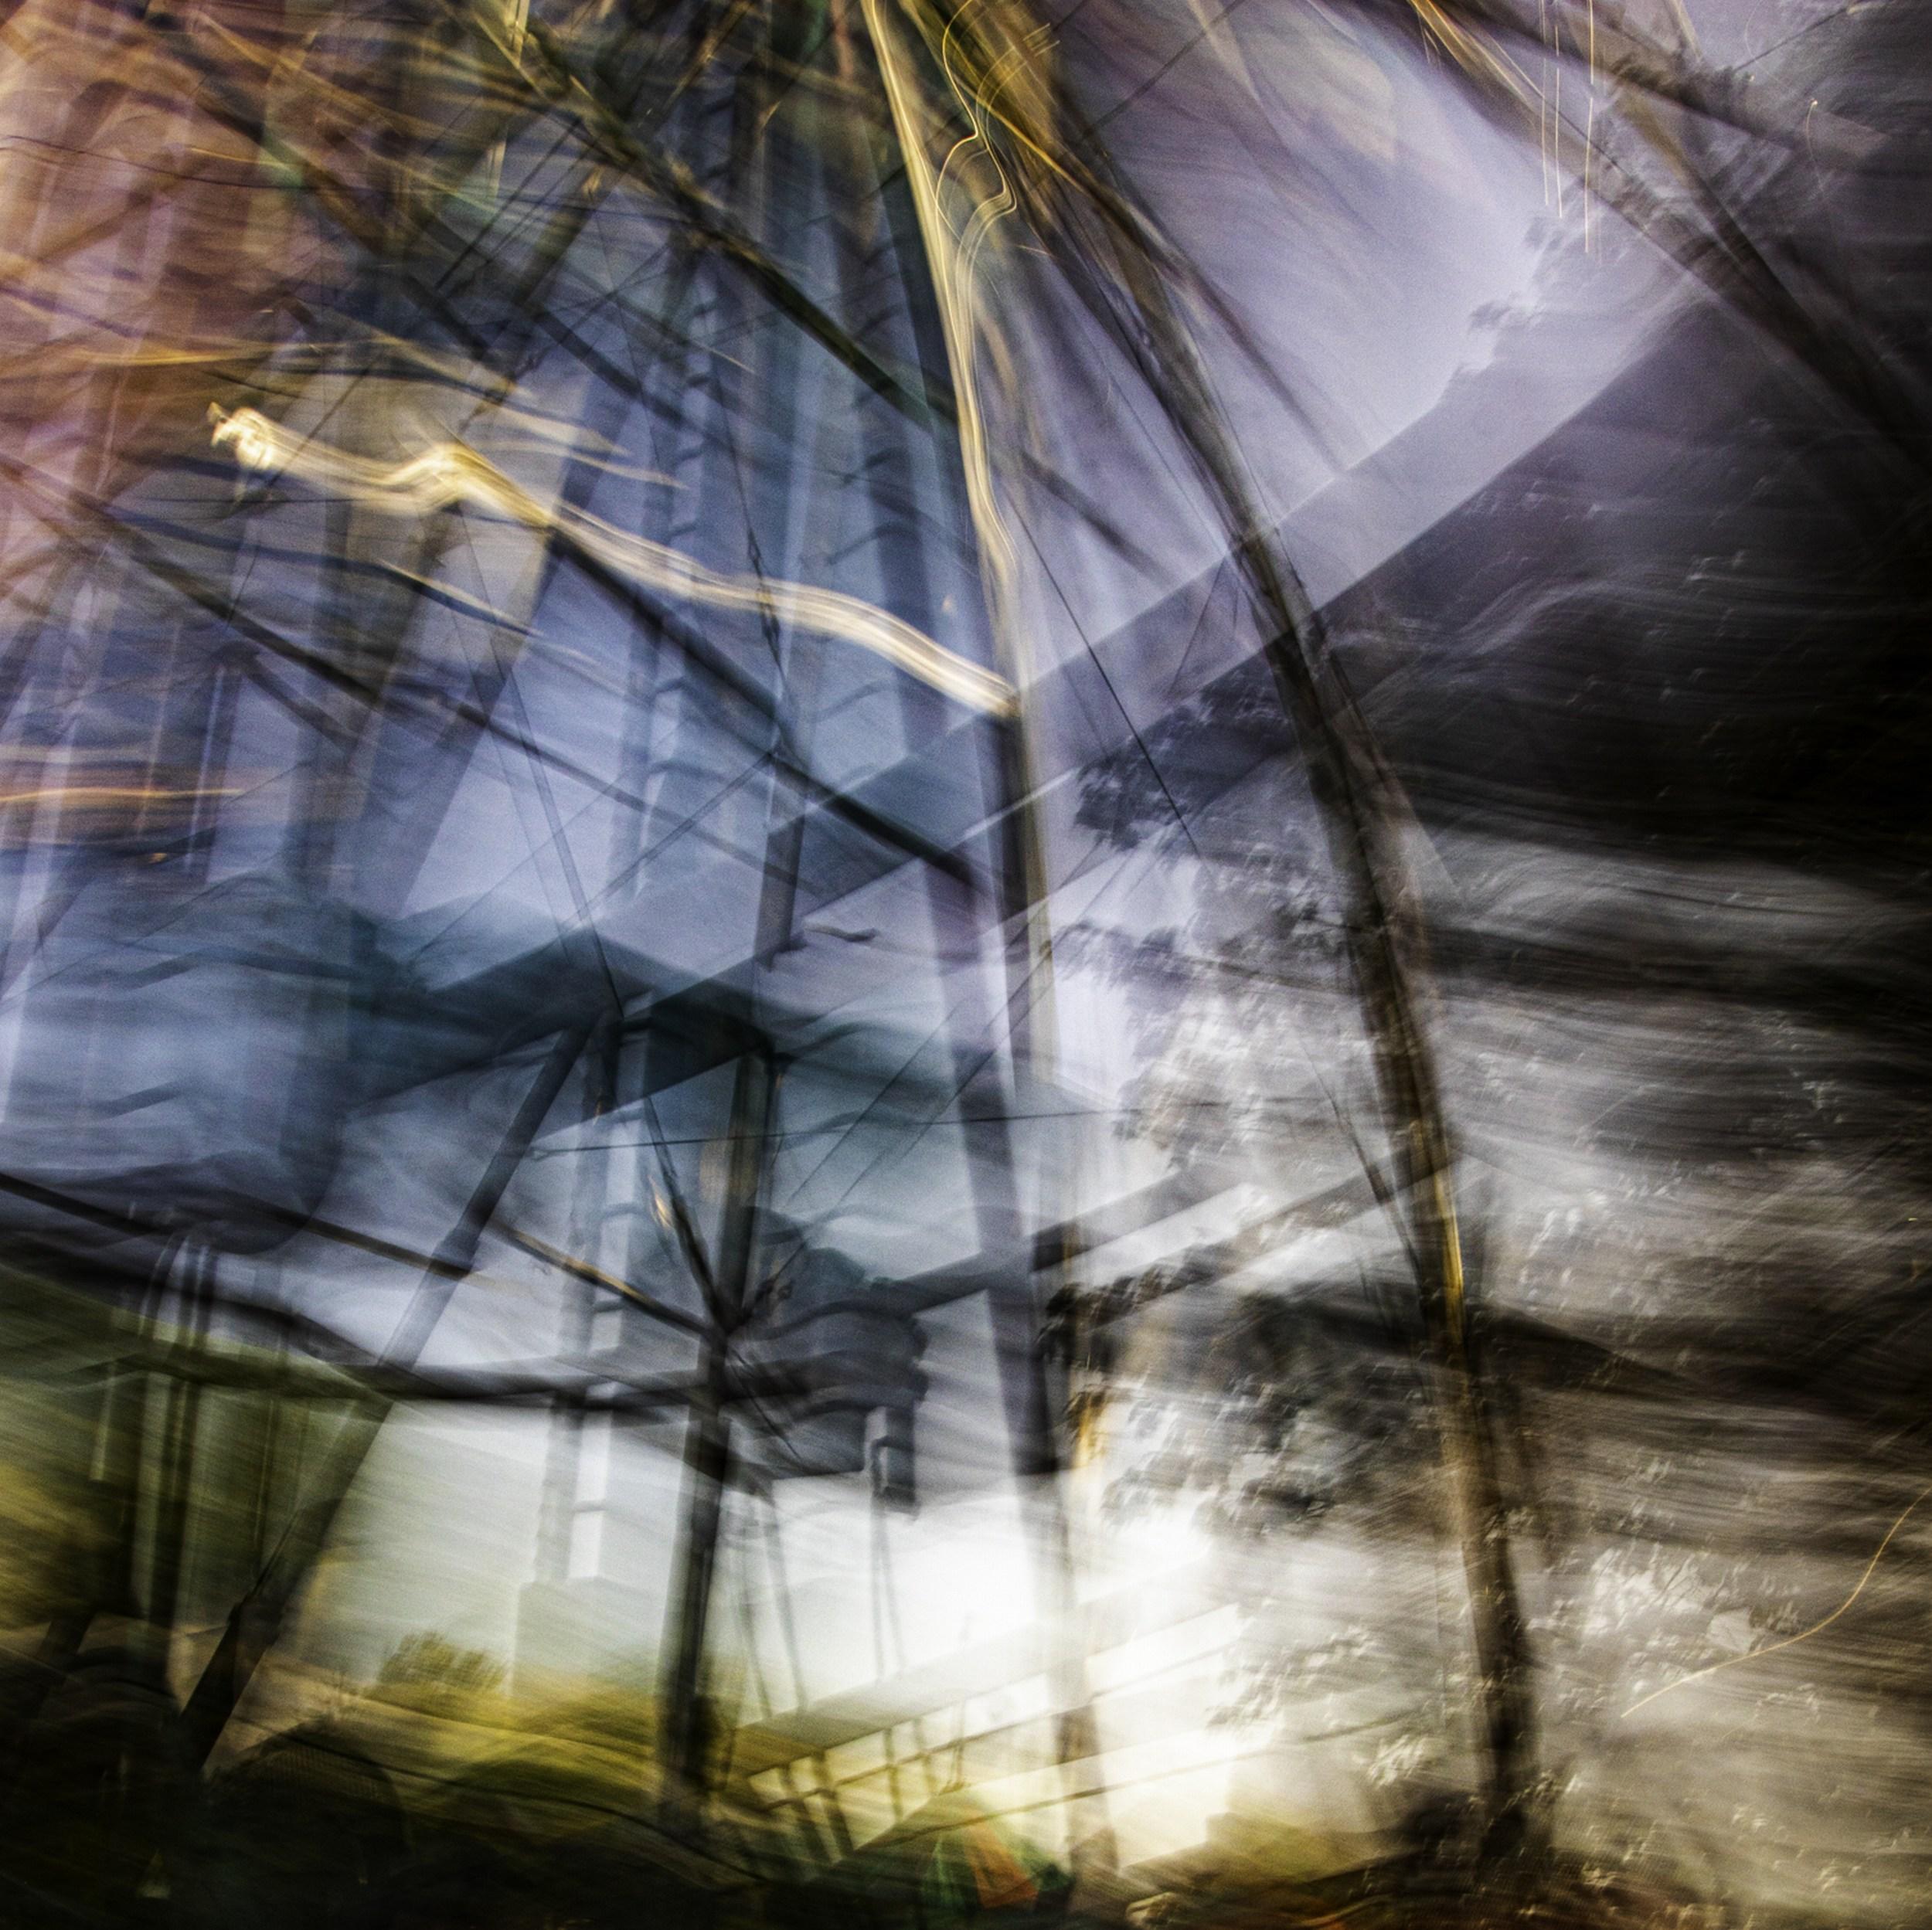 Jeffrey Tamblyn Abstract Photograph - Redemption and Retribution (Ferris wheel, motion blur, kinetic, fairgrounds)